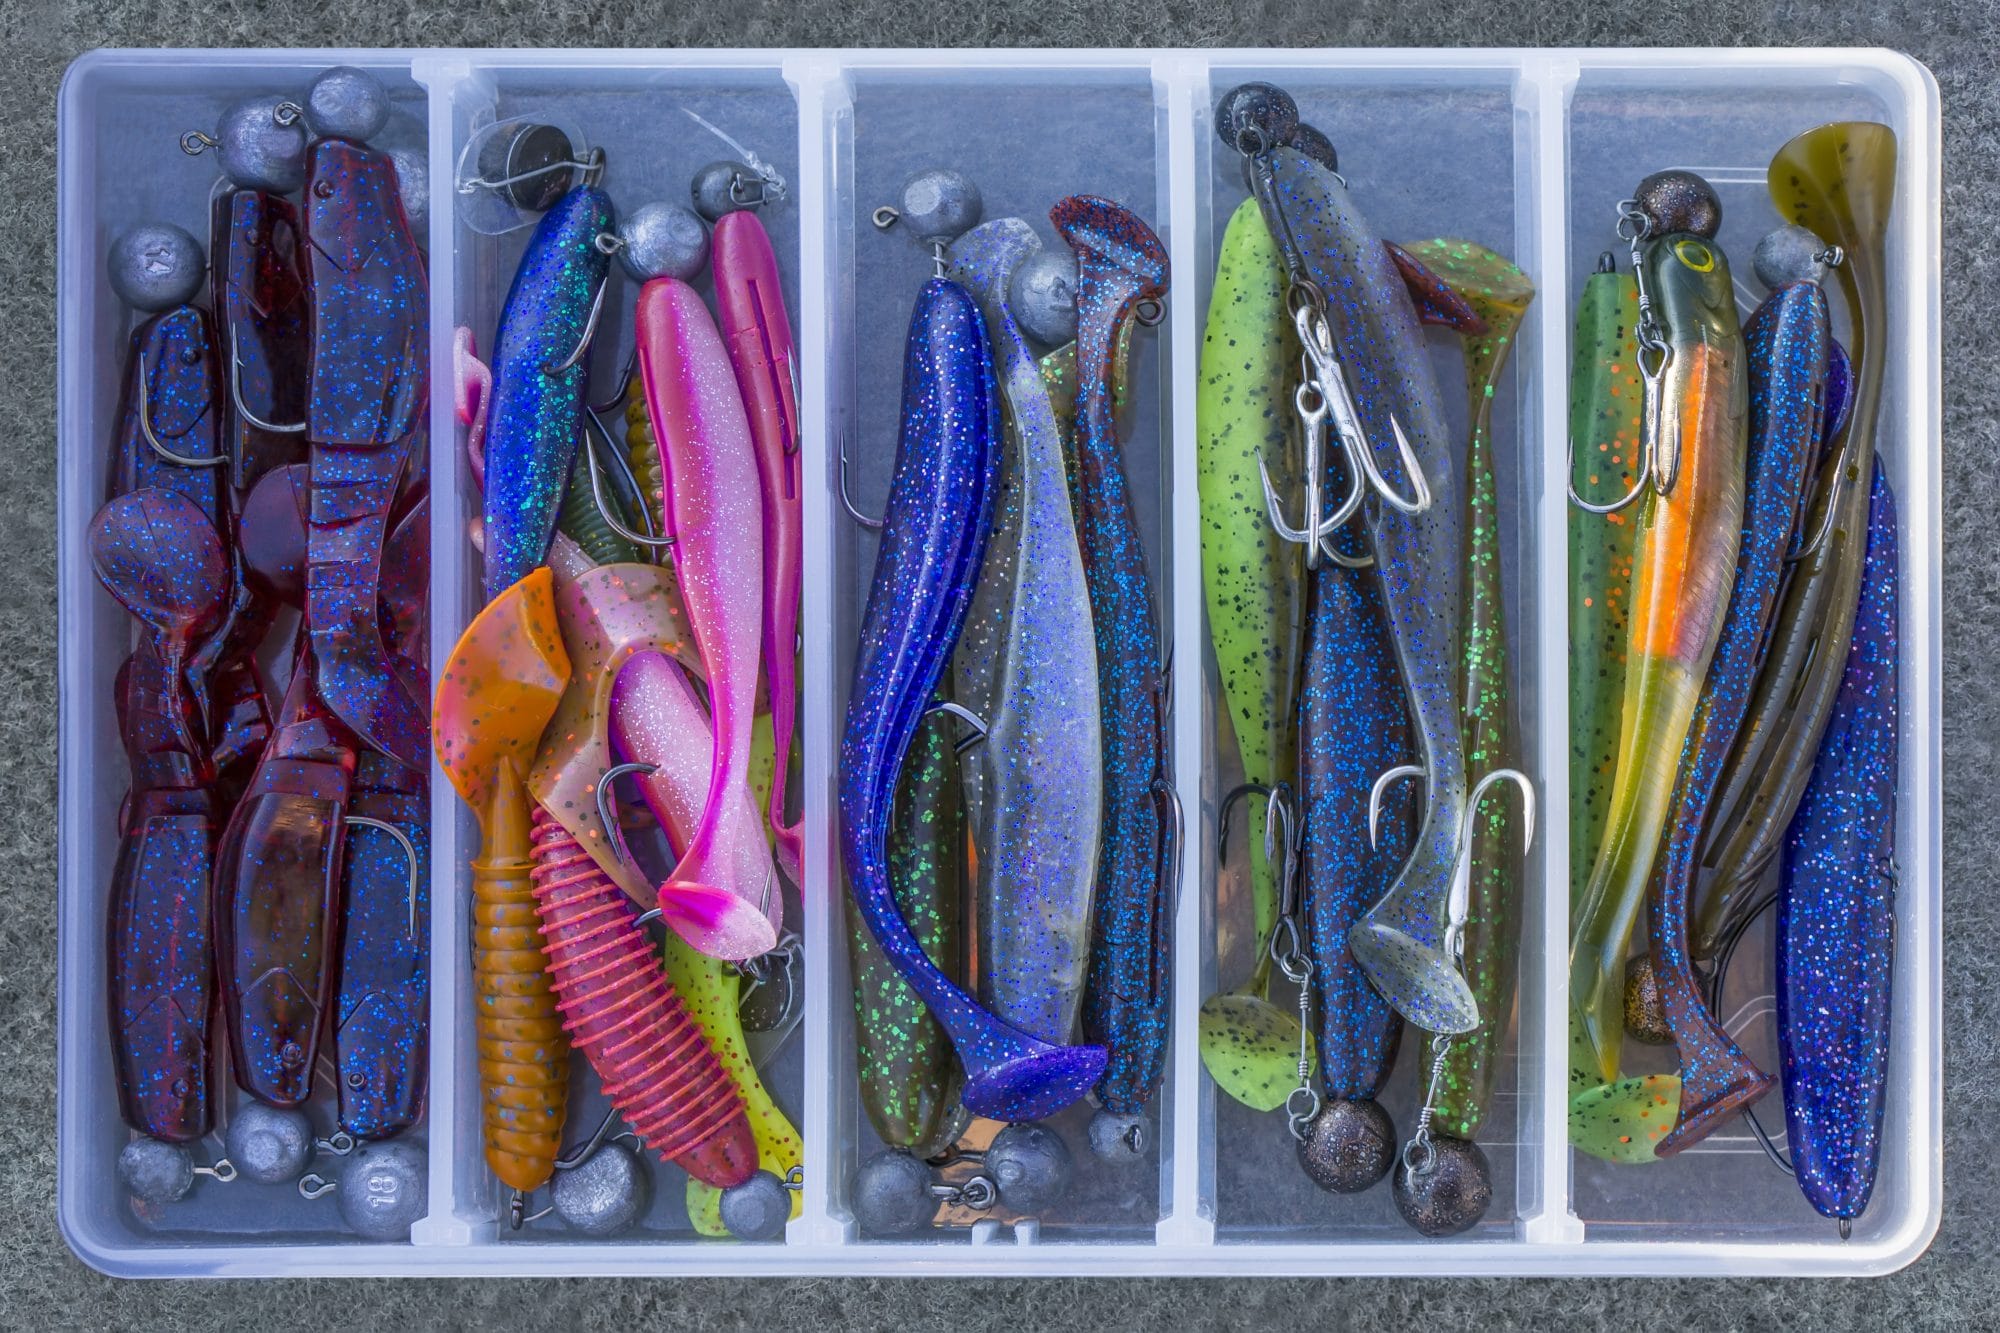 Saltwater tackle box. Am I missing something? : r/Fishing_Gear